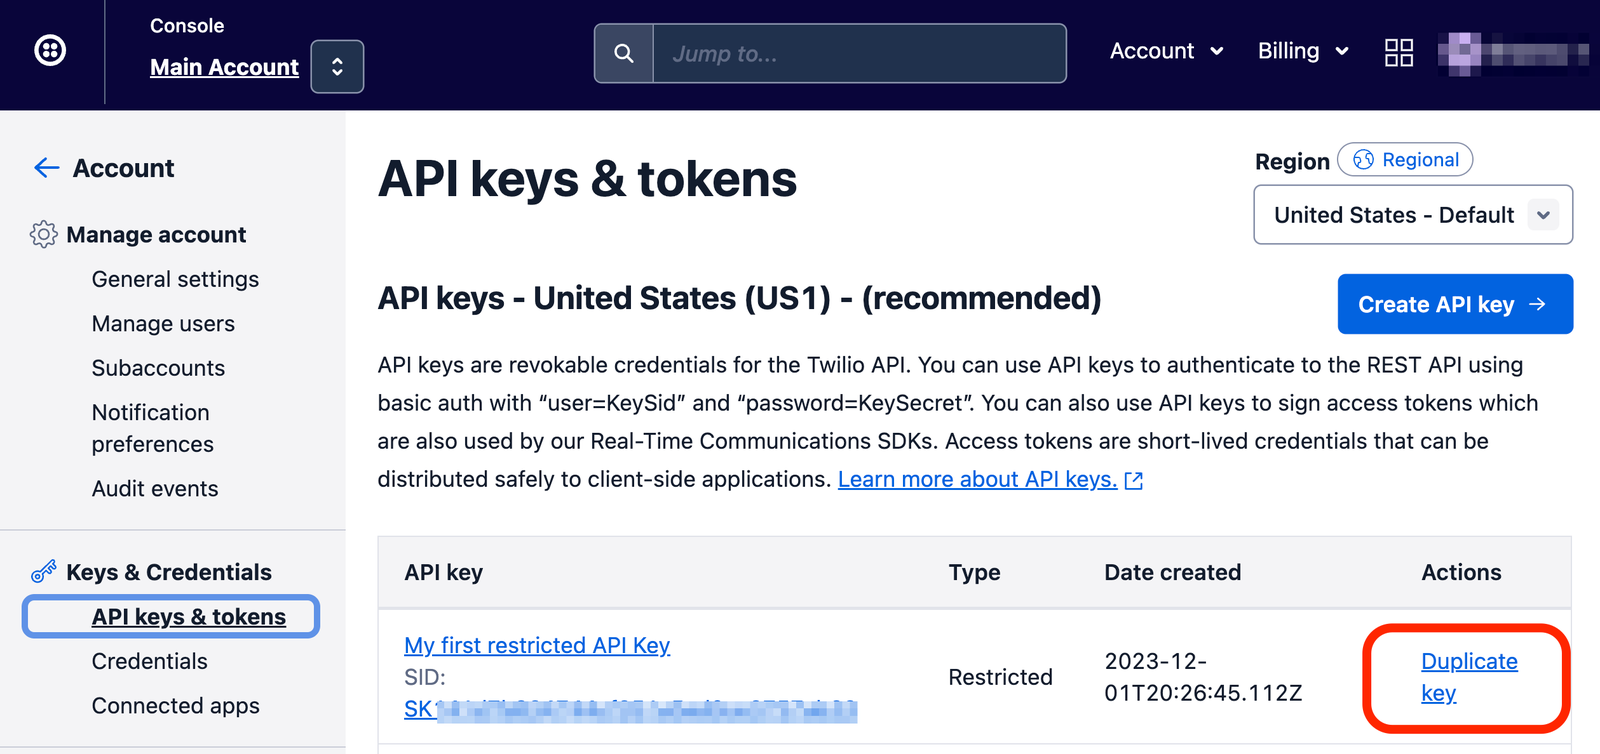 Highlighting the 'Duplicate key' option on the API keys & tokens page in the Console.